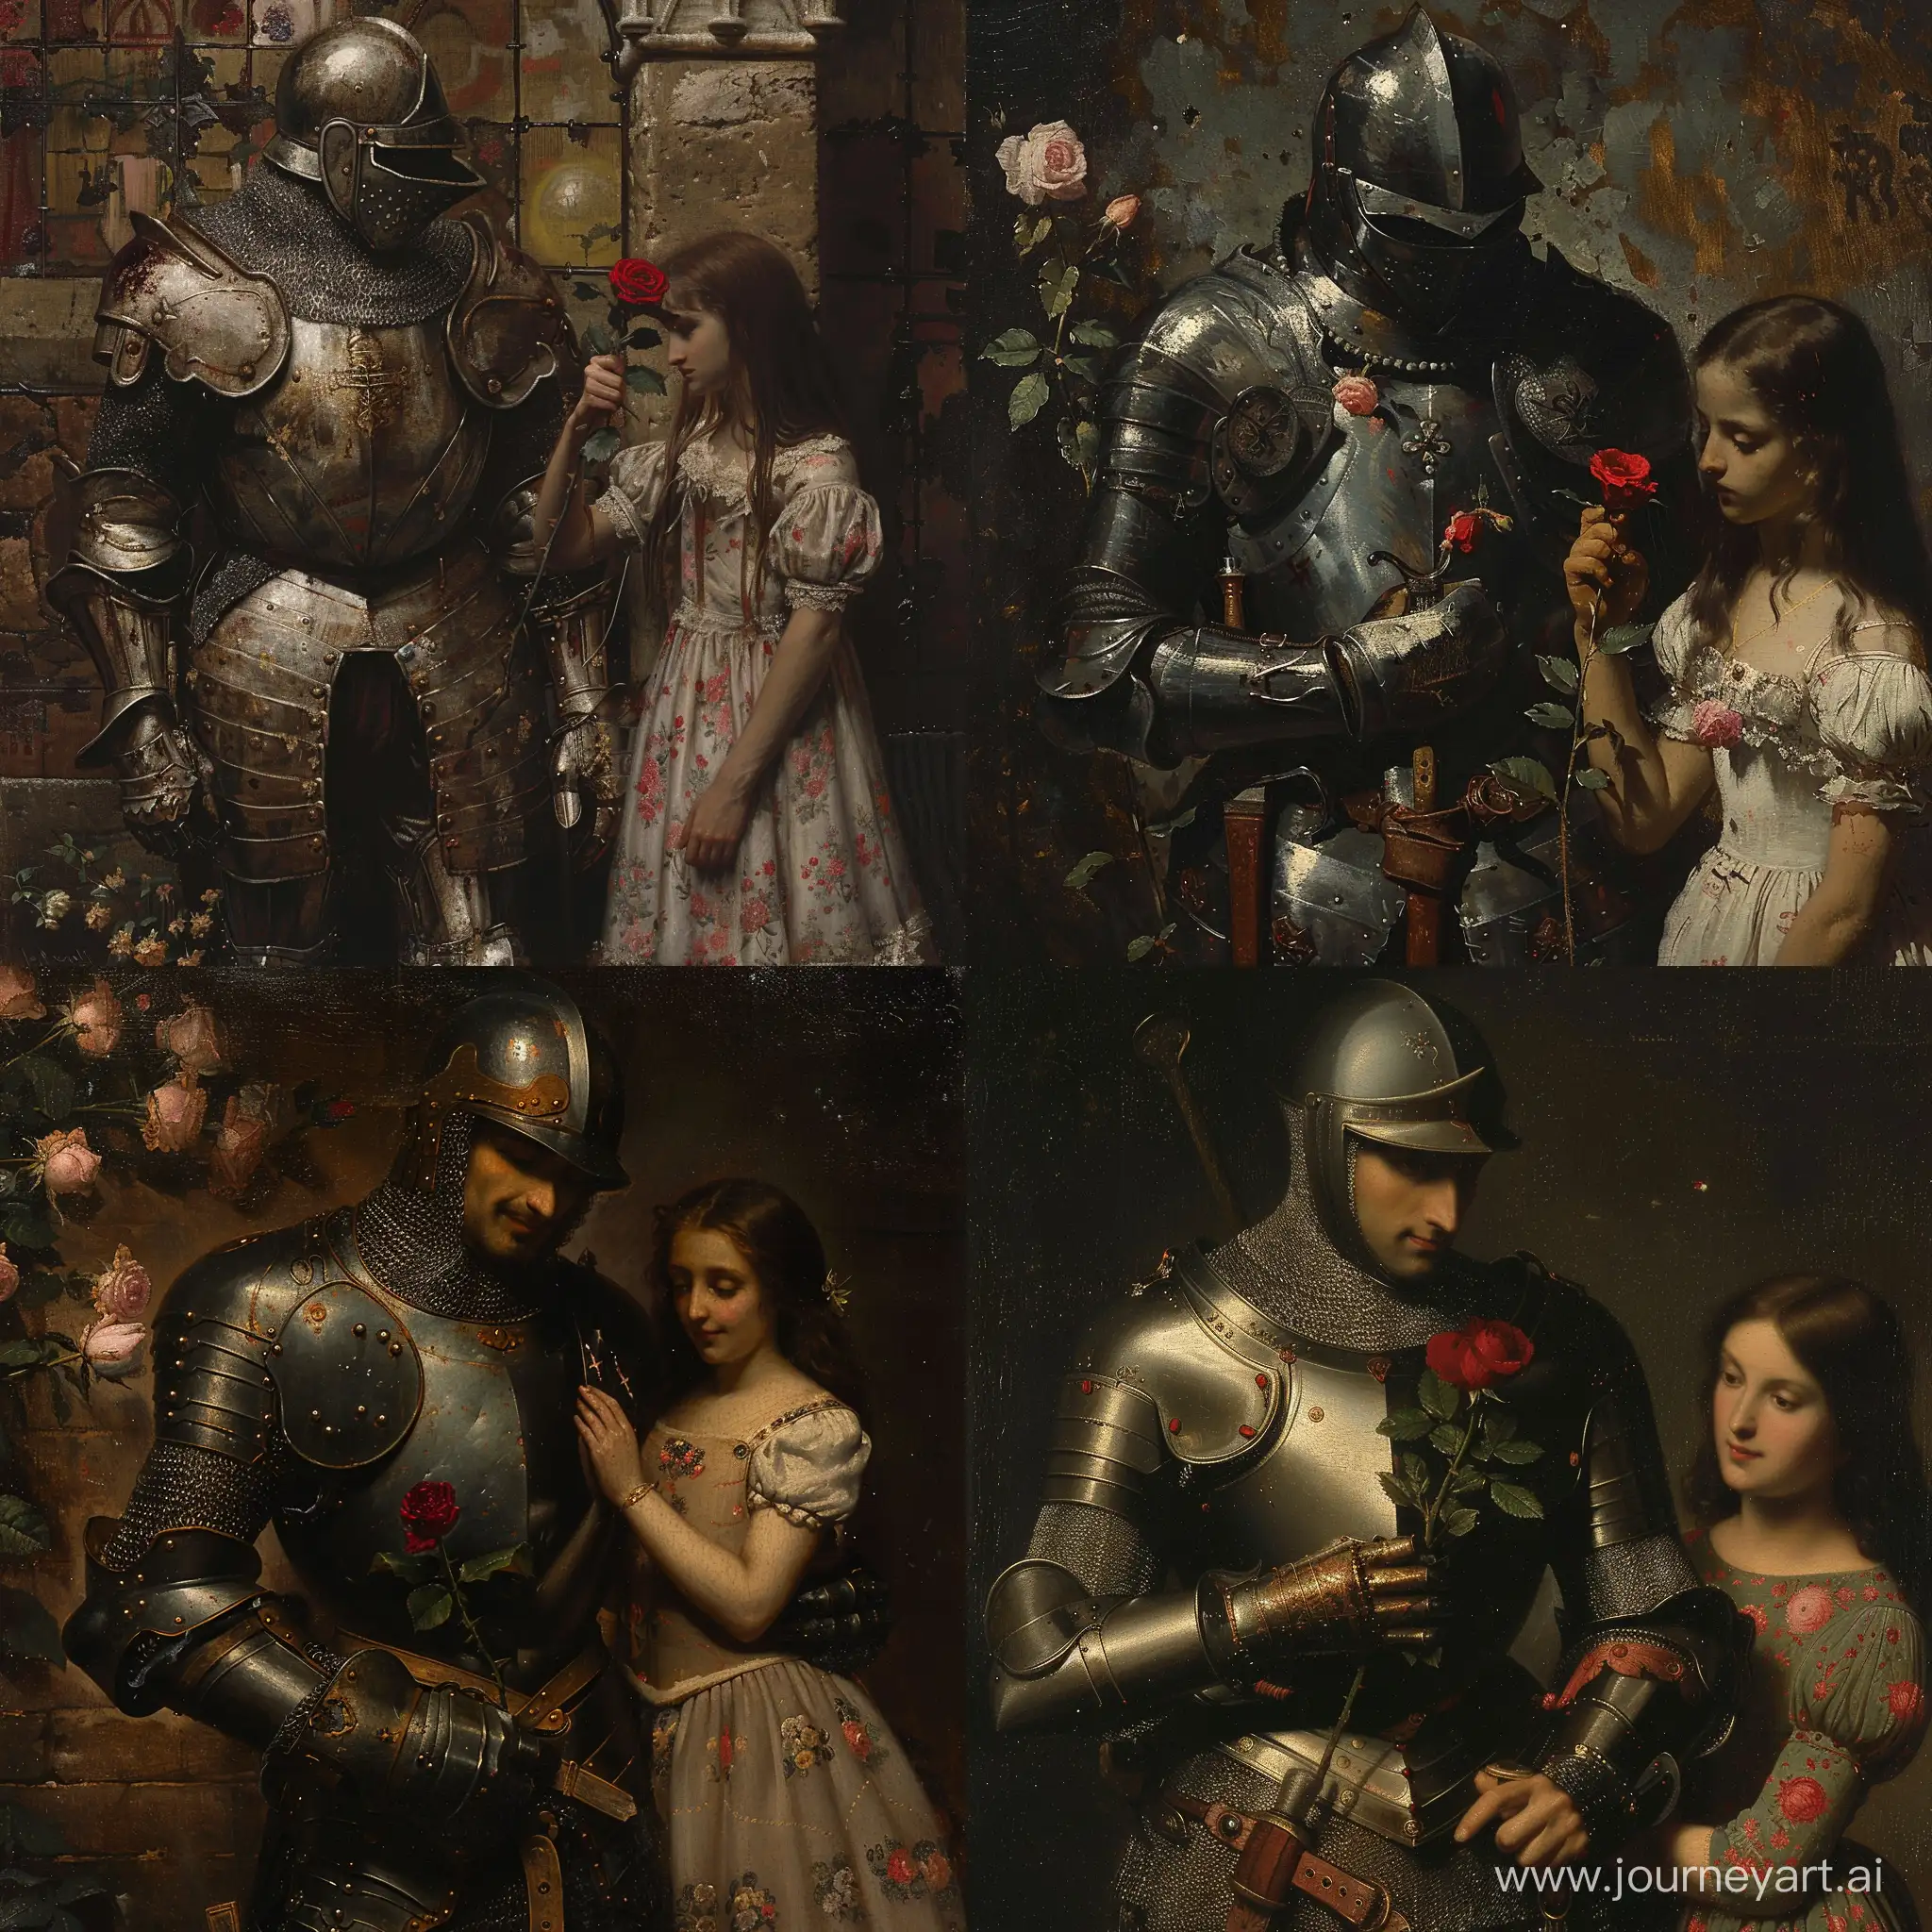 Knight-in-Armor-Holding-Crimson-Rose-with-Sweet-Girl-Renaissance-Style-Painting